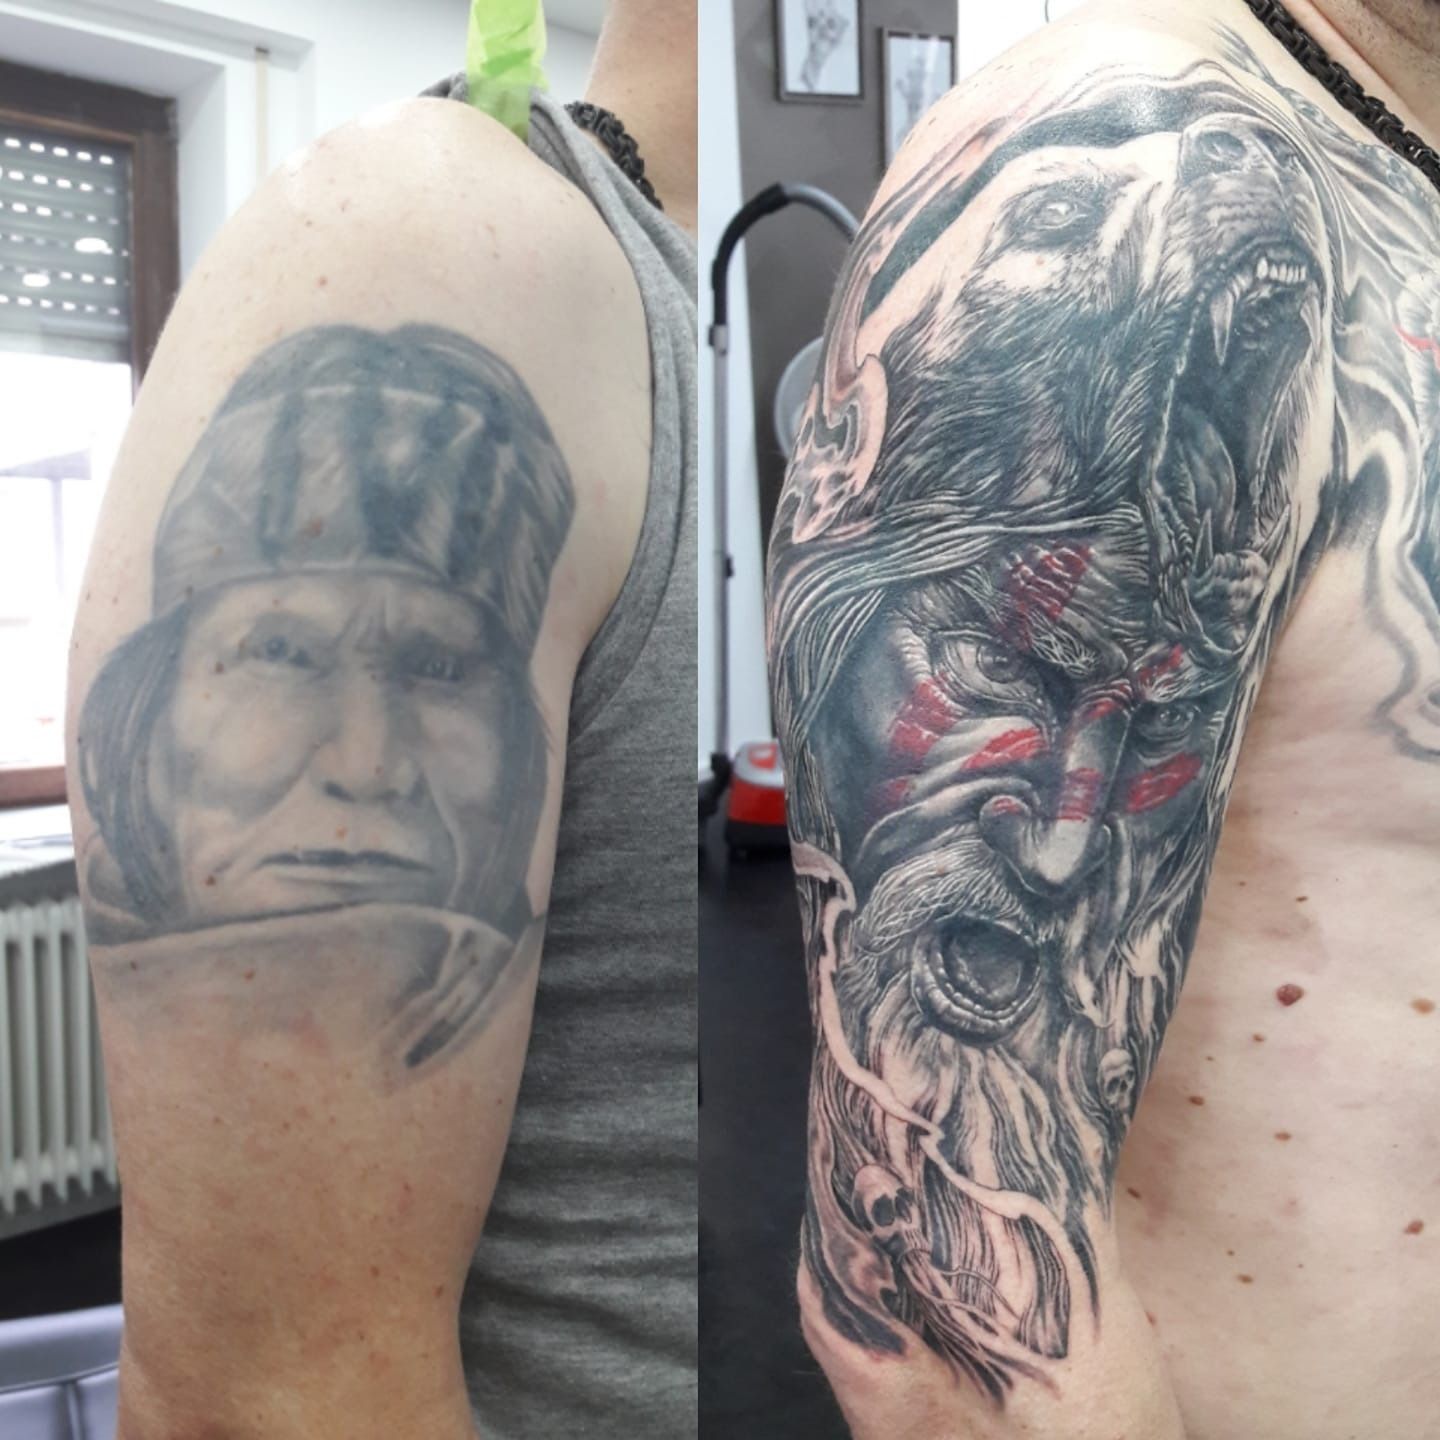 250 Berserk Tattoo Ideas That Make You Want To Lose Control